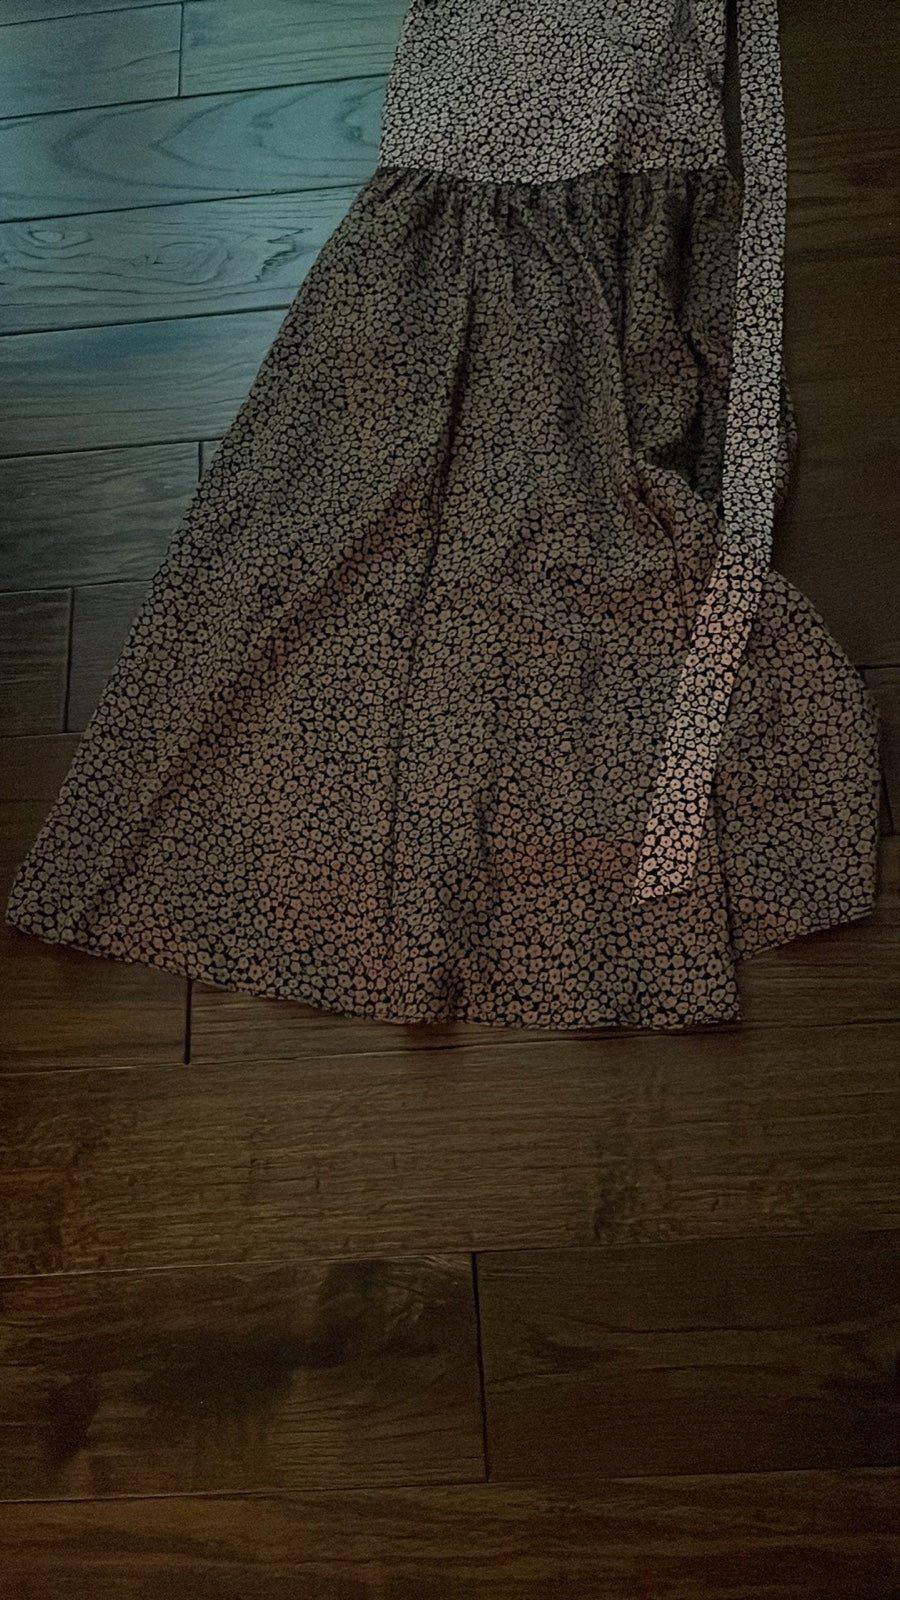 Factory Direct  Anthropologie Hutch Leopard Purple and Tan Wrap Dress size XS OxuDpng6x hot sale